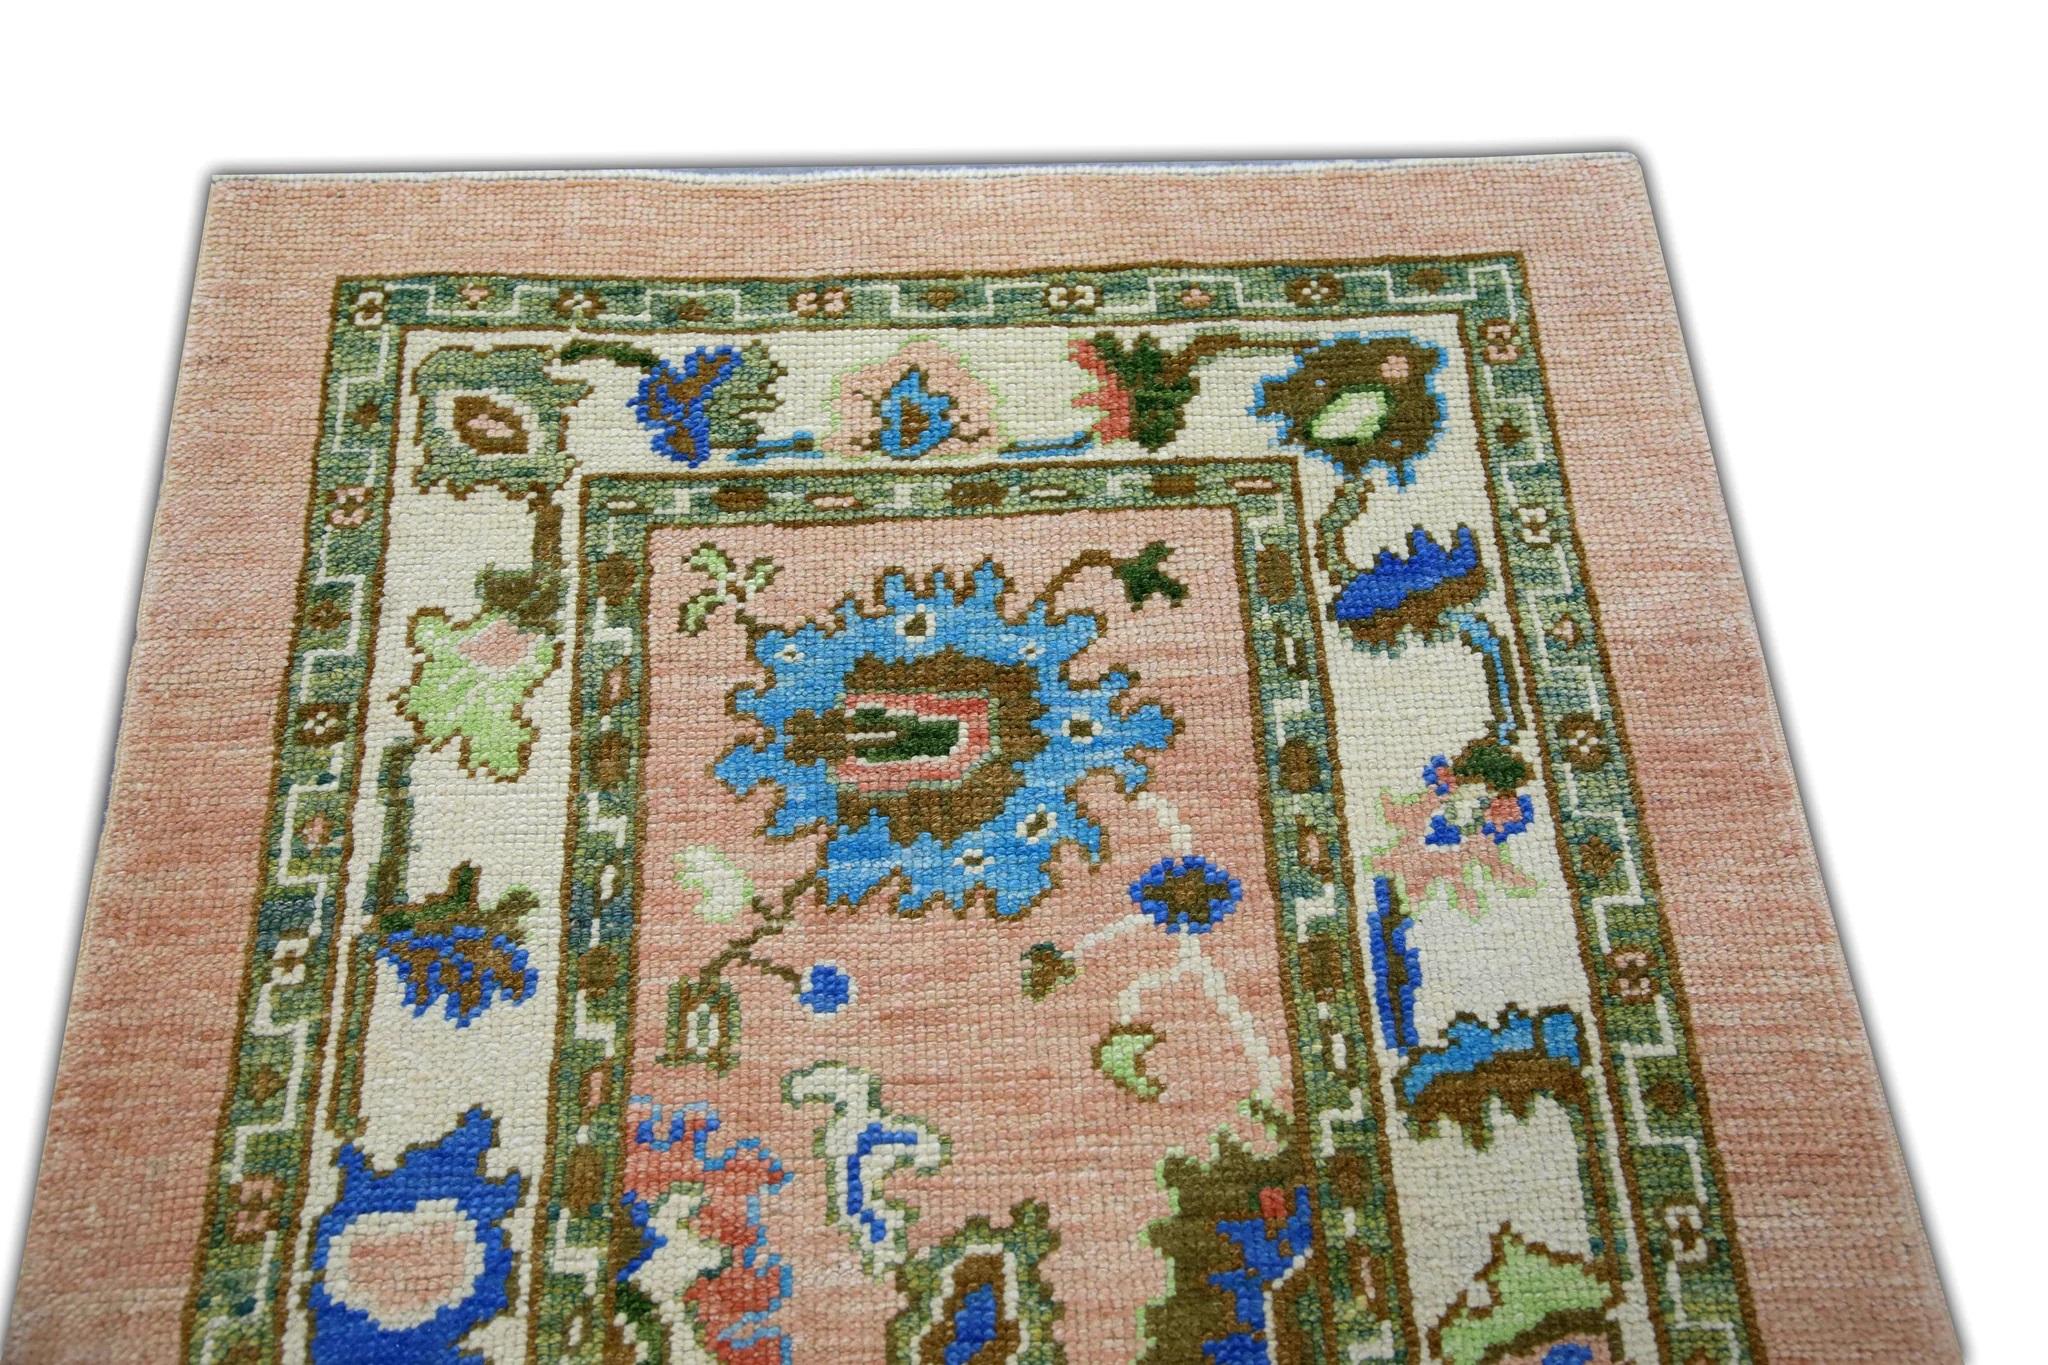 Floral Handwoven Turkish Oushak Rug in Coral, Green, Brown, and Blue 3' x 5'1